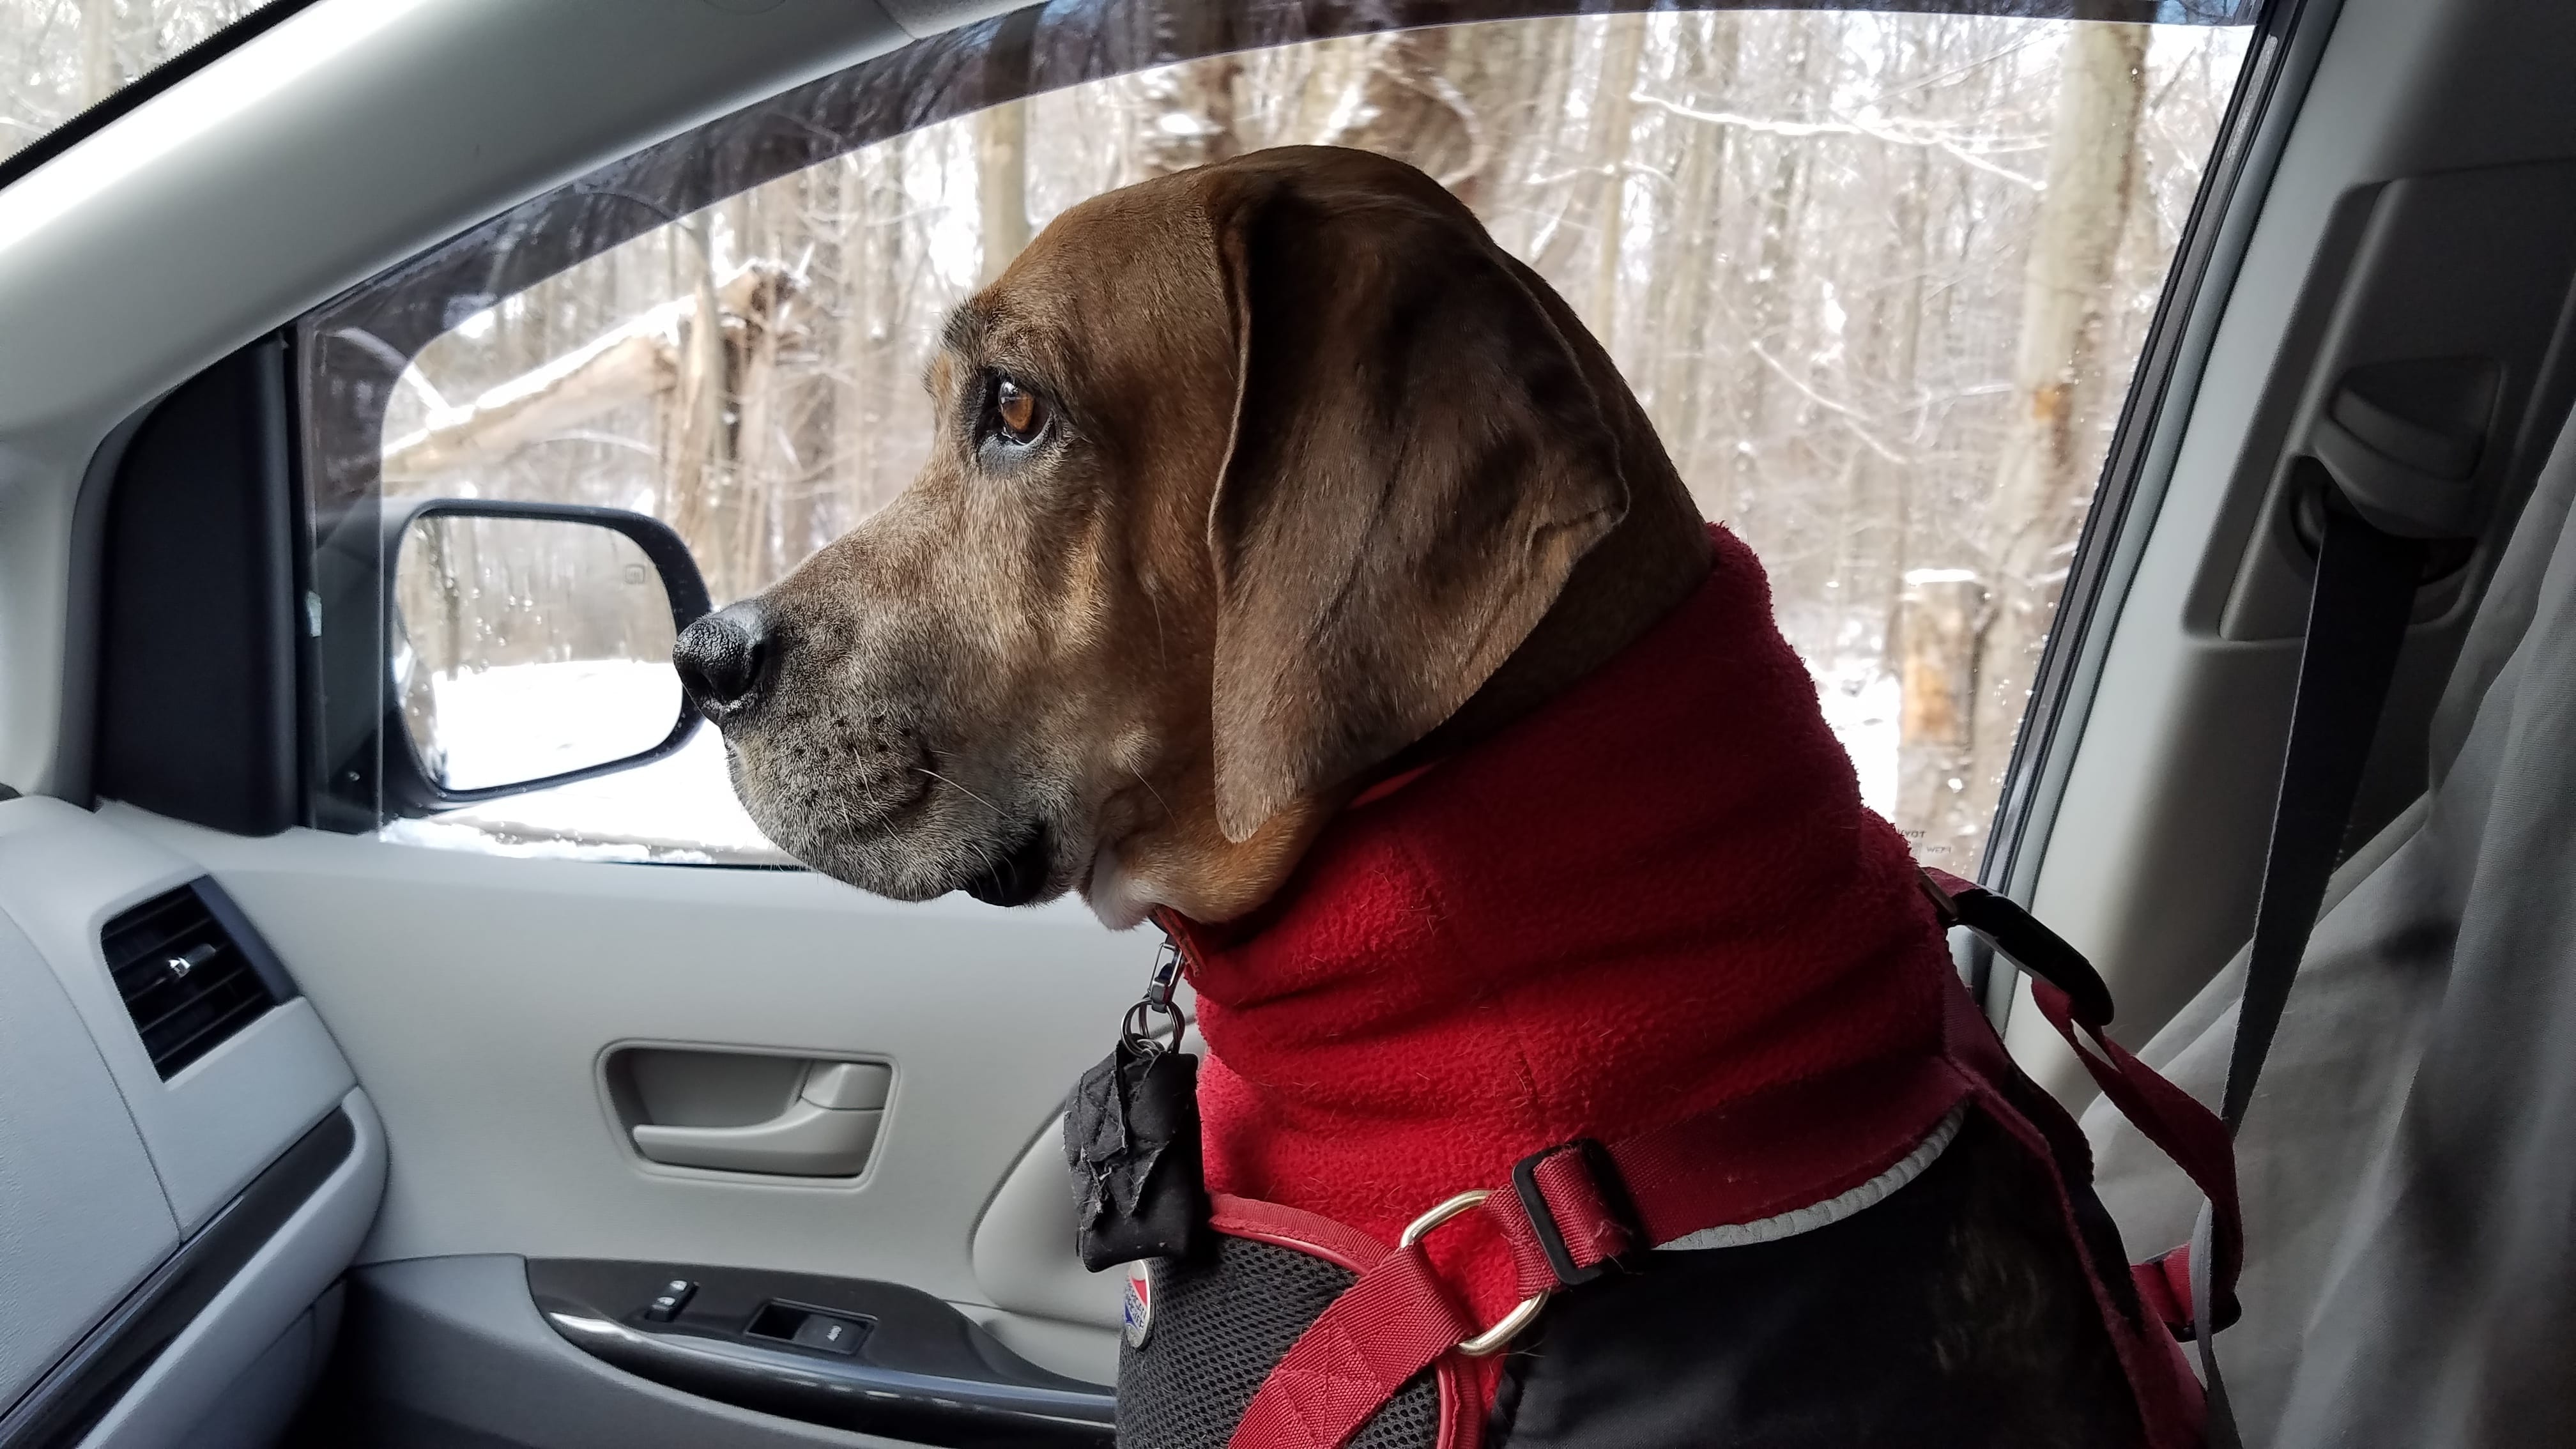 Tibby riding shot gun, dressed up warmly and ready for dog hiking adventures with his friends.